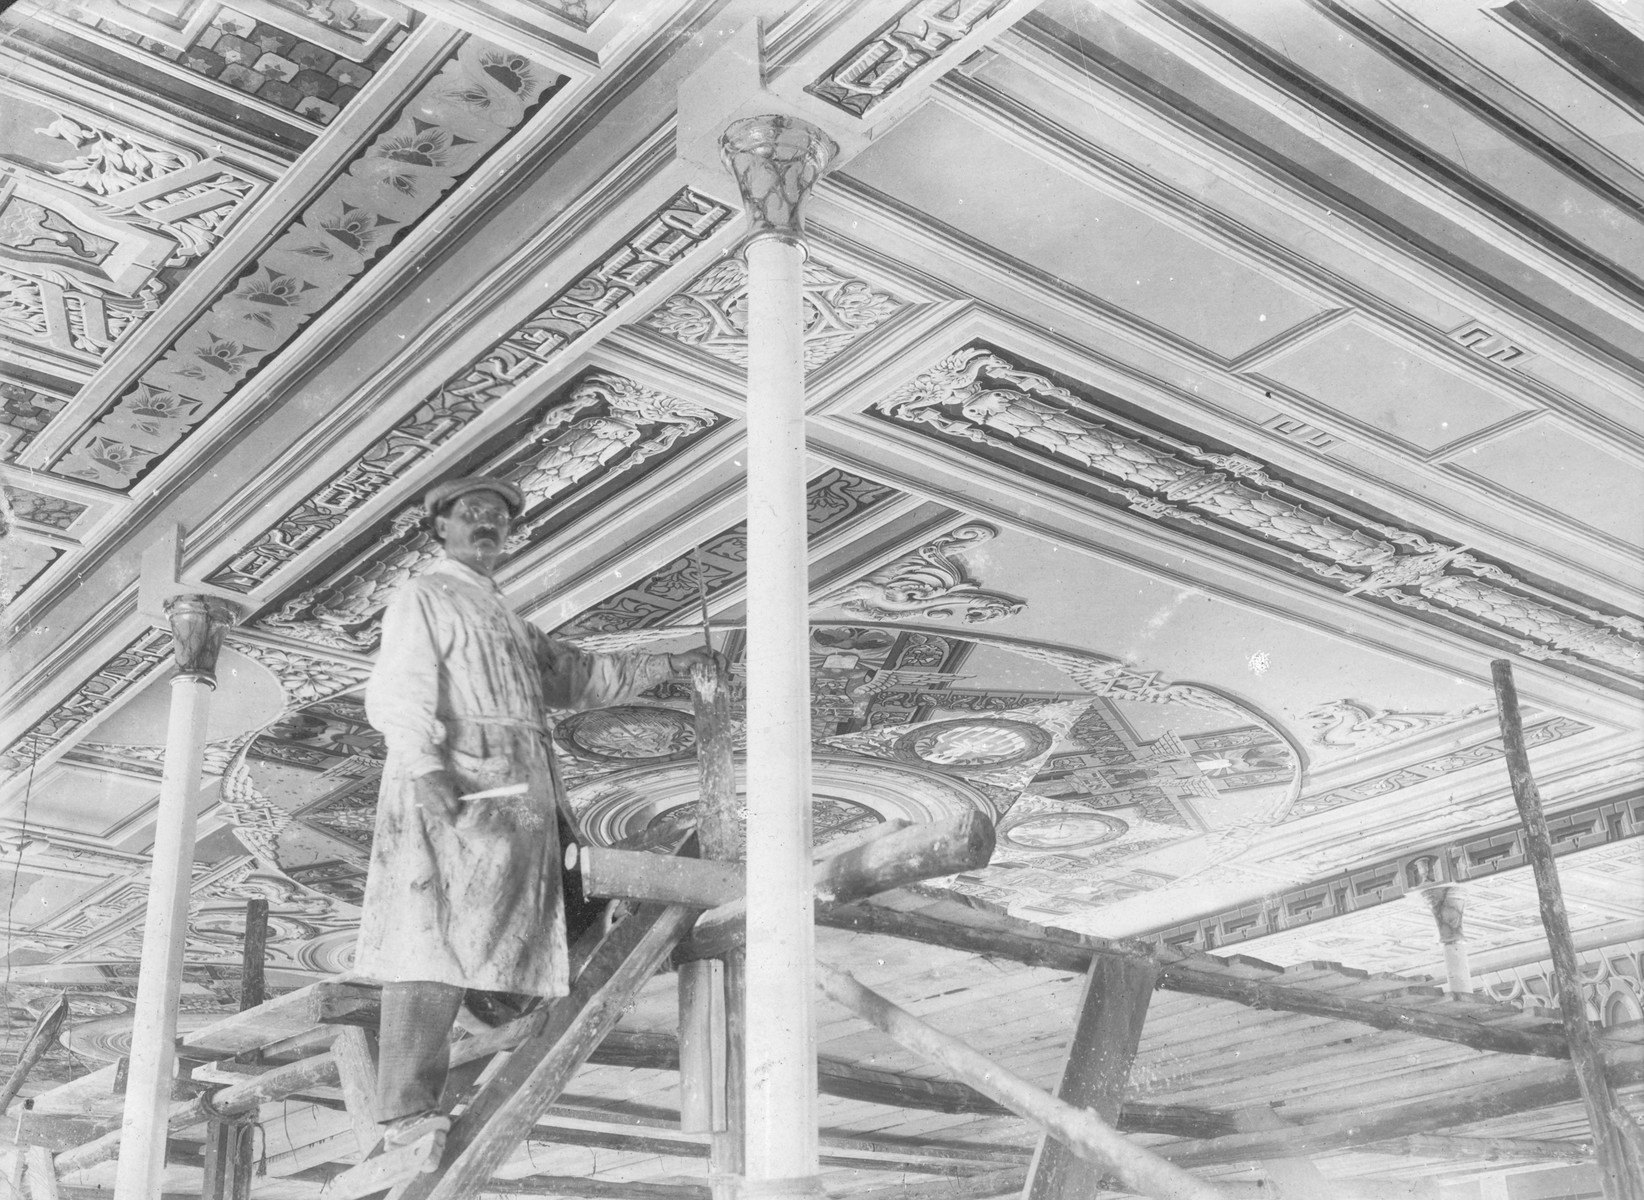 Perec Willenberg paints a ceiling mural in the old synagogue in Czestochowa.